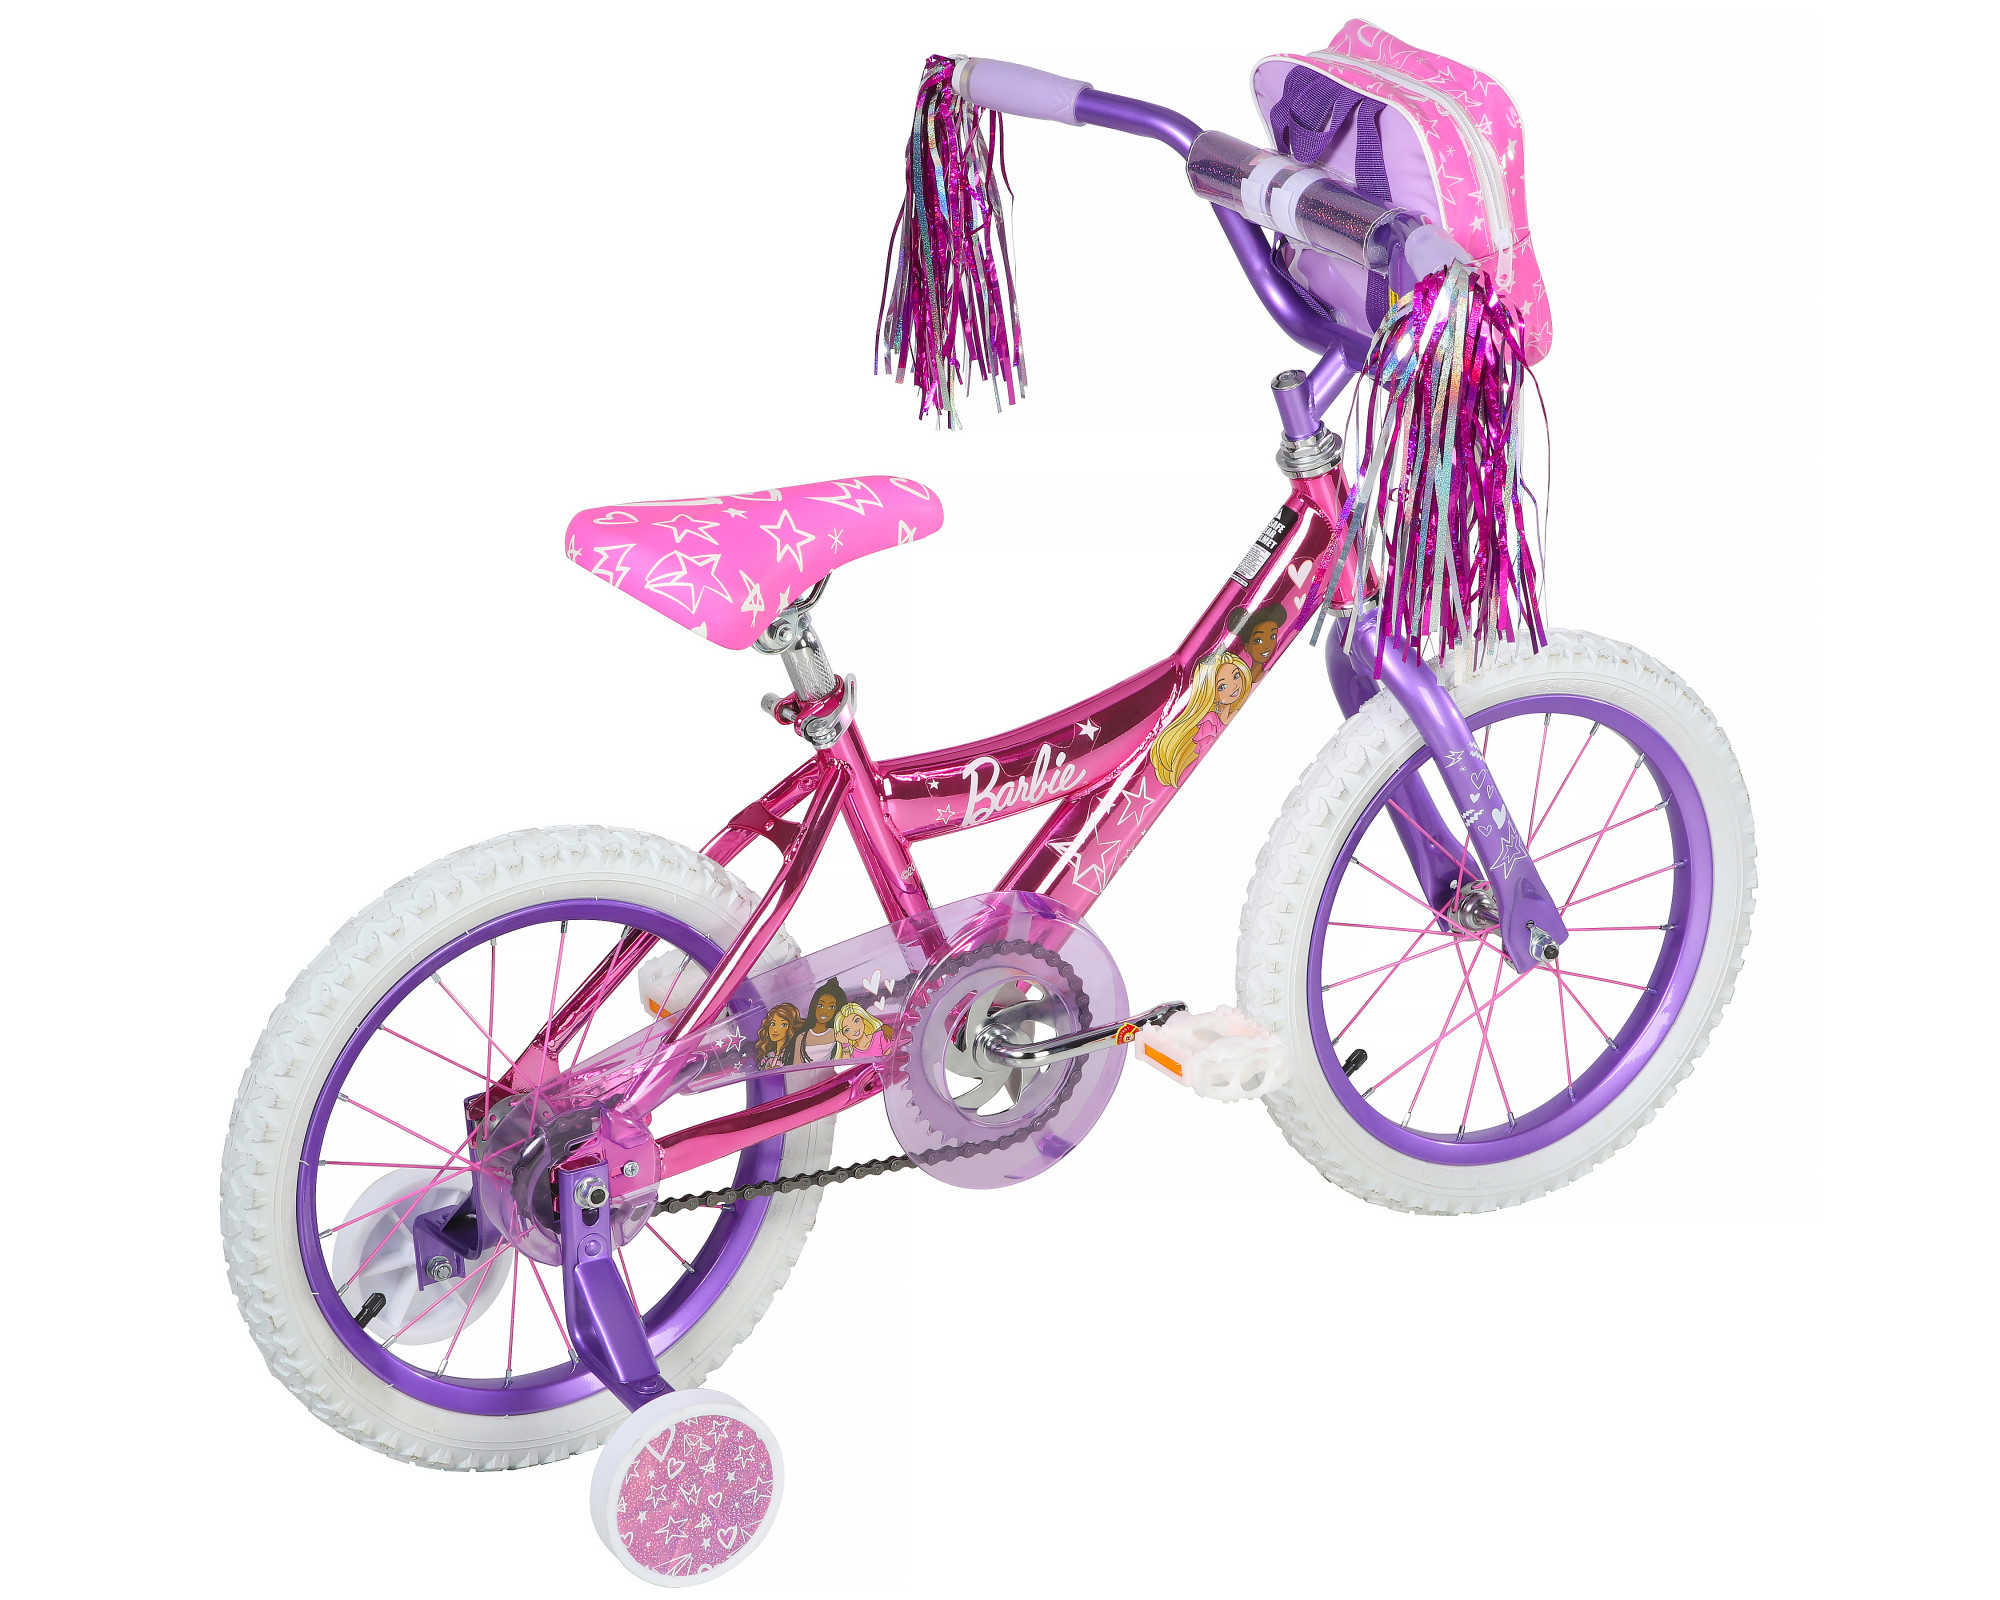 Dynacraft Barbie 16-inch Girls BMX Bike for Age 5-7 Years, Pink - image 3 of 8